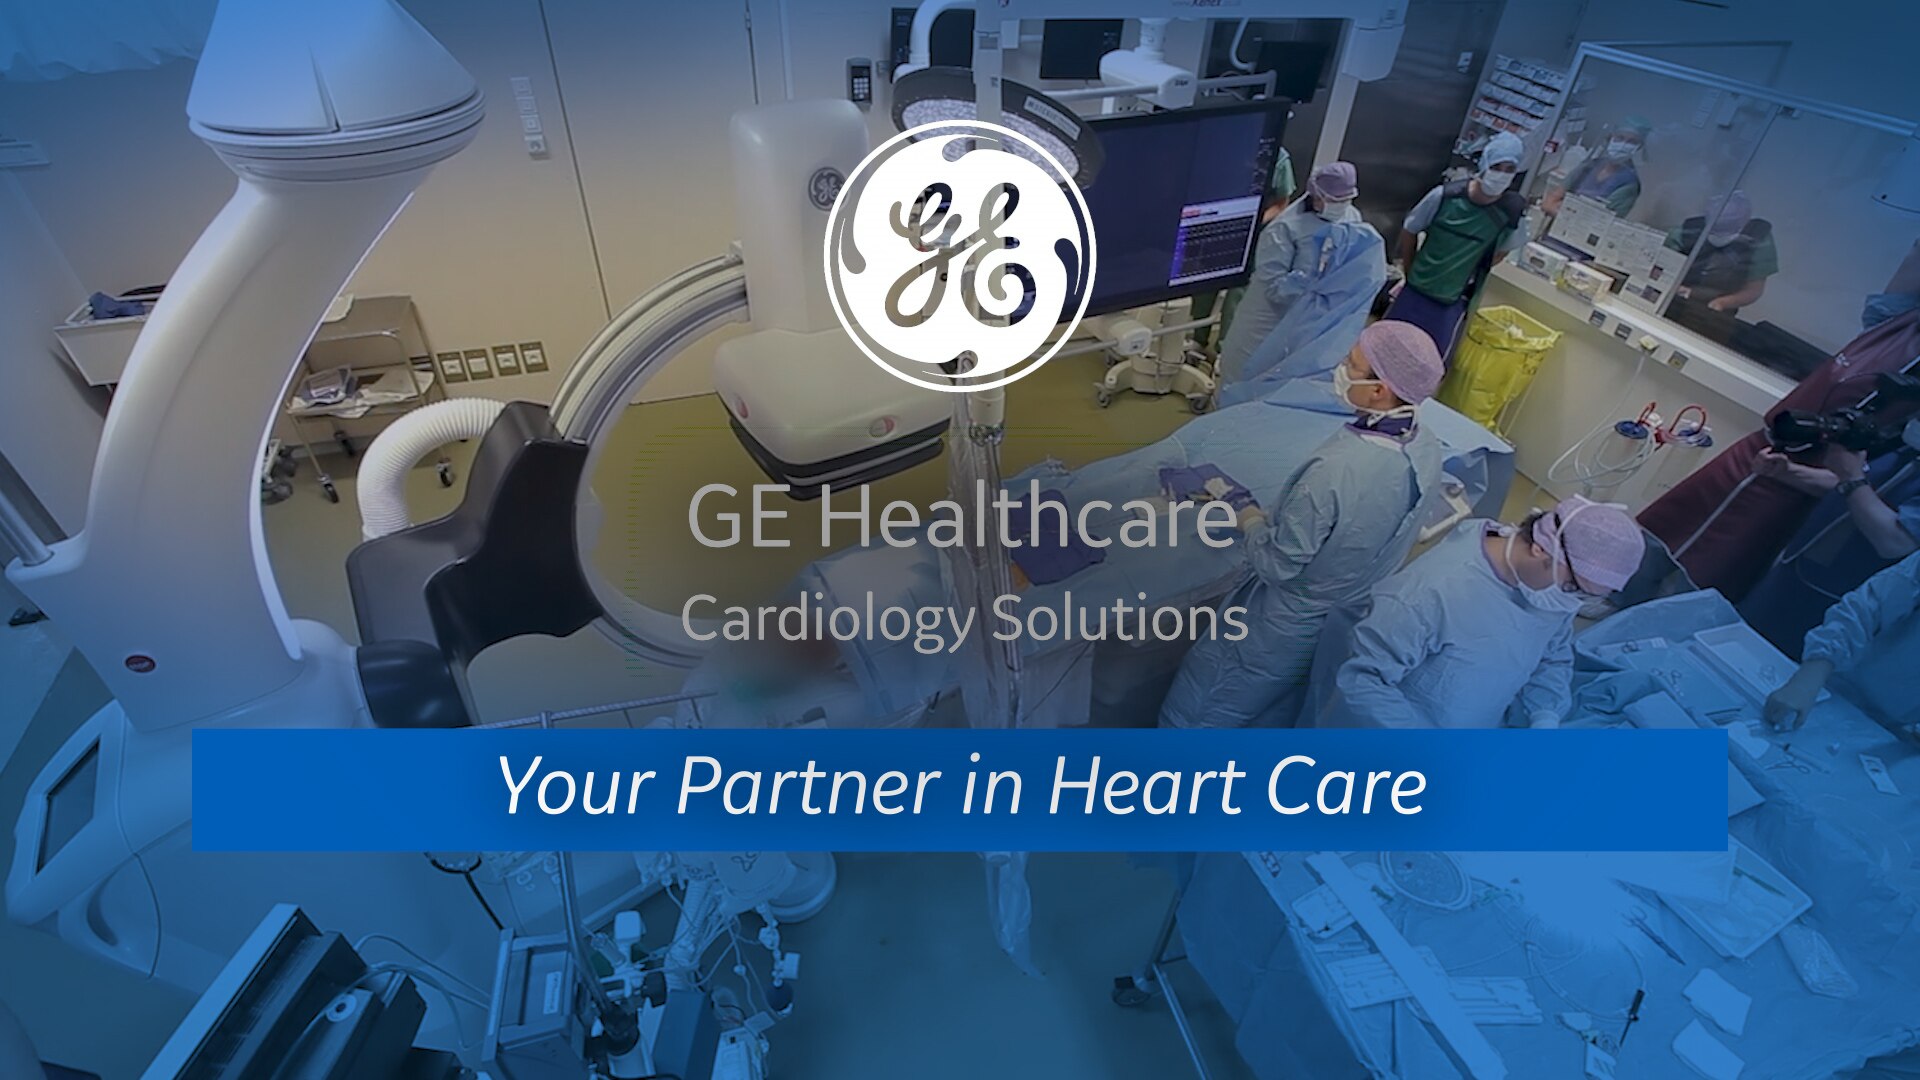 GEHC_ACC-Cardiology-full-width- Solutions_Sizzle-1920x1080